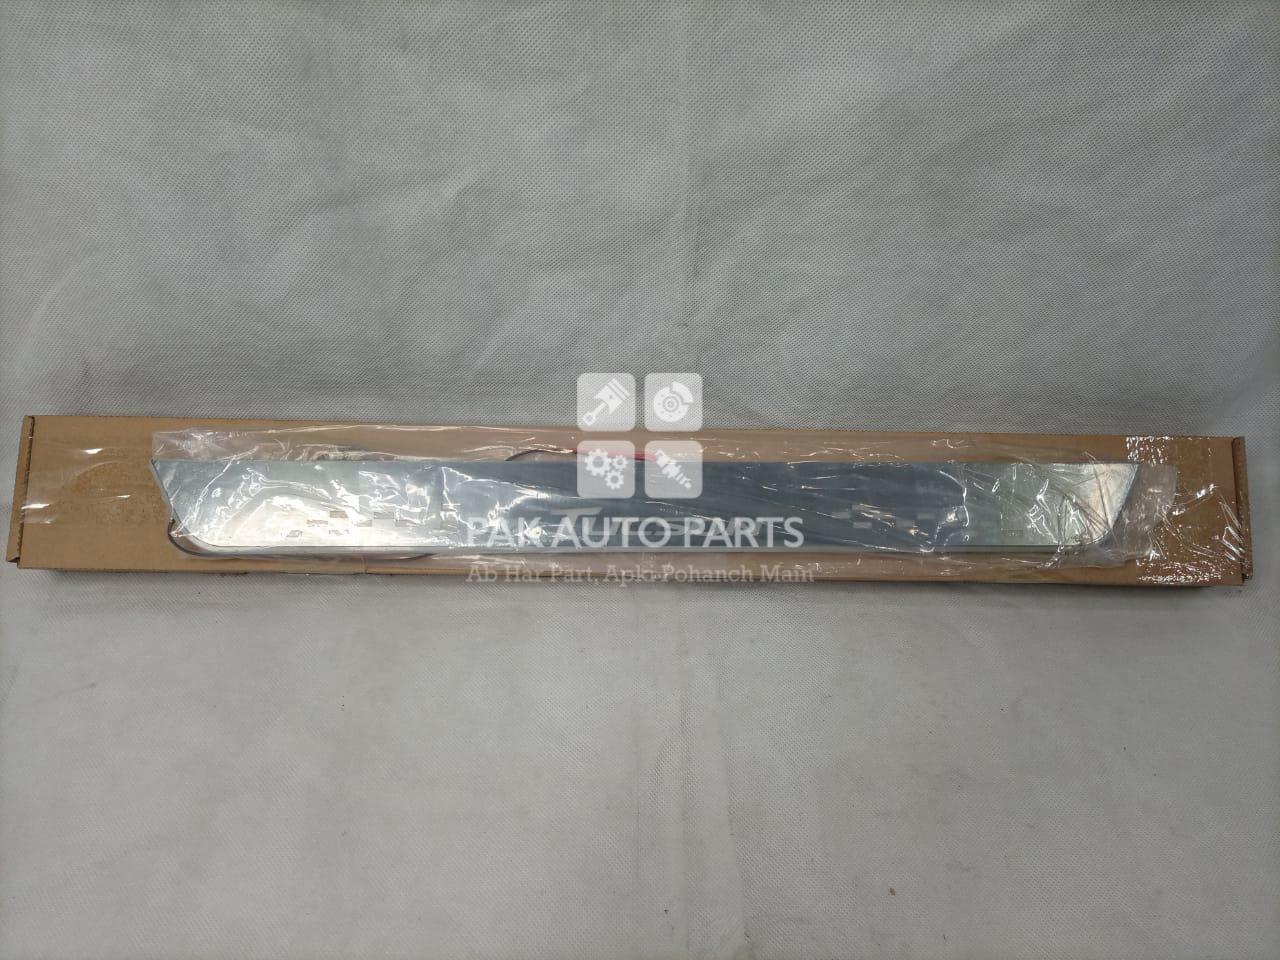 Picture of Hyundai Tucson Running Sill Plate(4pcs)